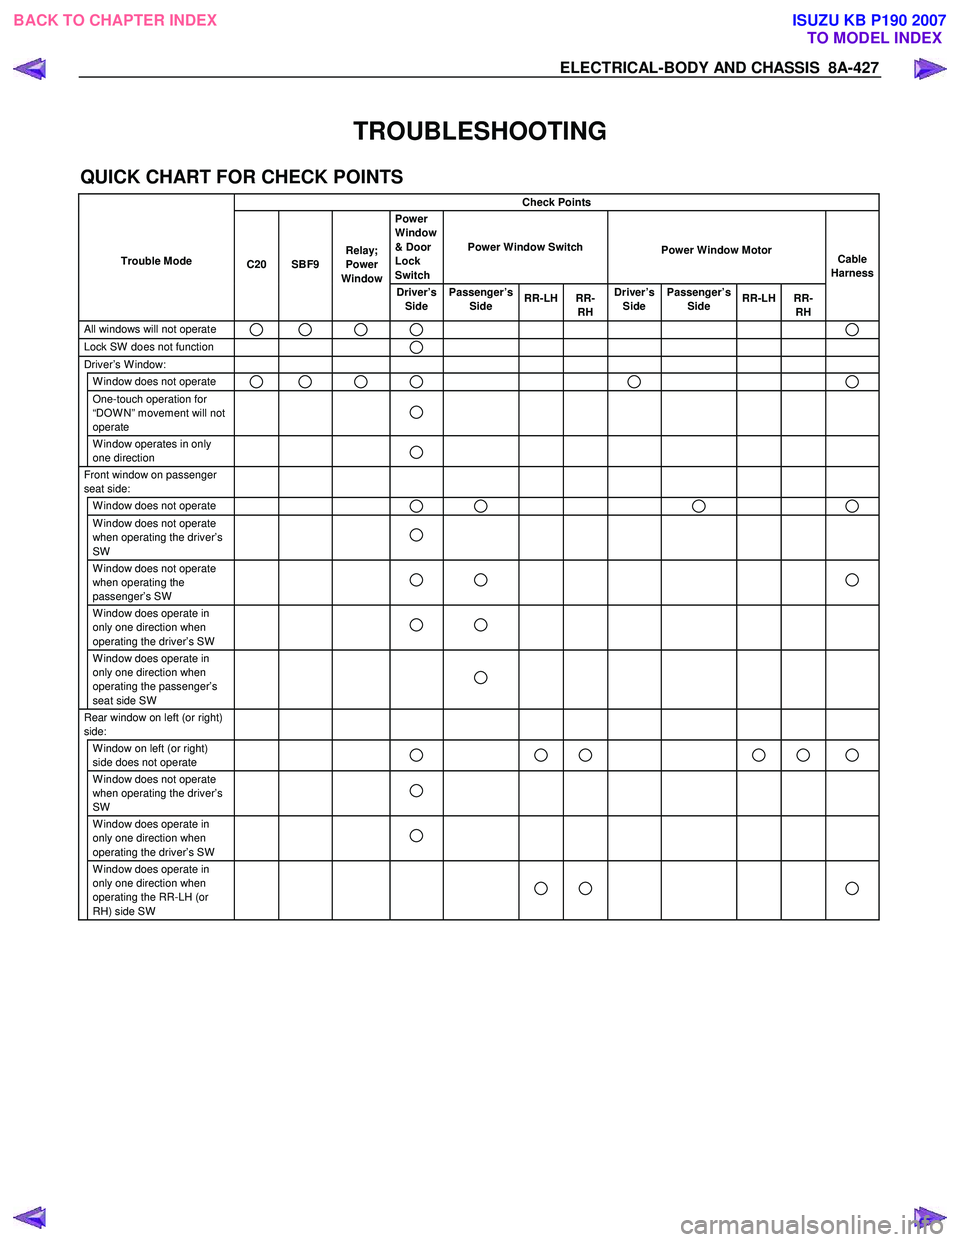 ISUZU KB P190 2007  Workshop Service Manual ELECTRICAL-BODY AND CHASSIS  8A-427 
 
TROUBLESHOOTING 
QUICK CHART FOR CHECK POINTS 
  Check Points 
  
 
 
Trouble Mode      Power 
Window 
& Door 
Lock 
Switch  Power Window Switch 
Power Window Mo